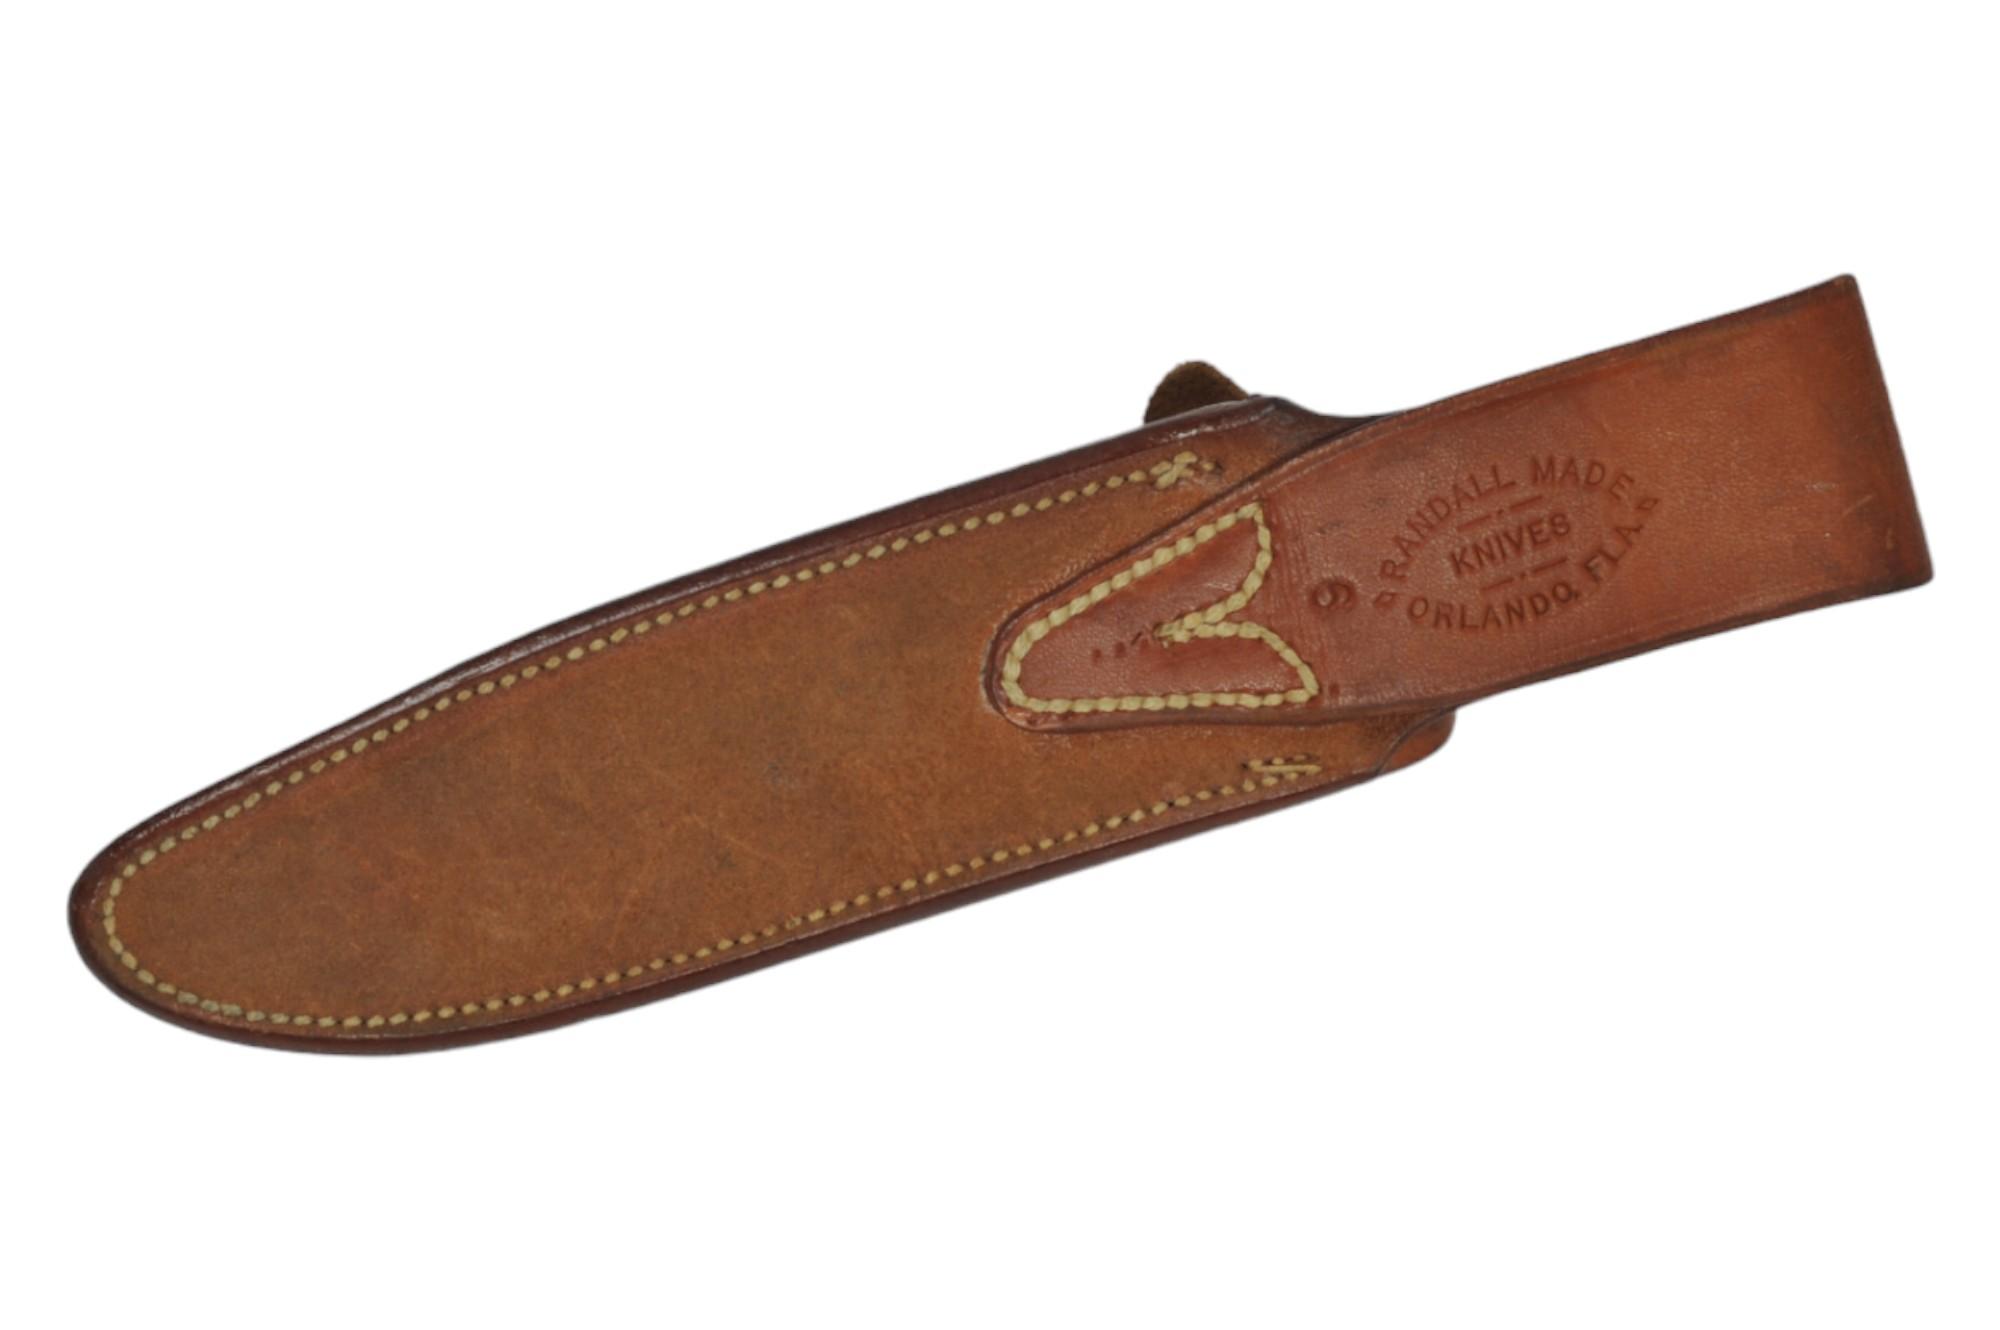 Randall Model 1 Stag Fighting Knife (KDW)